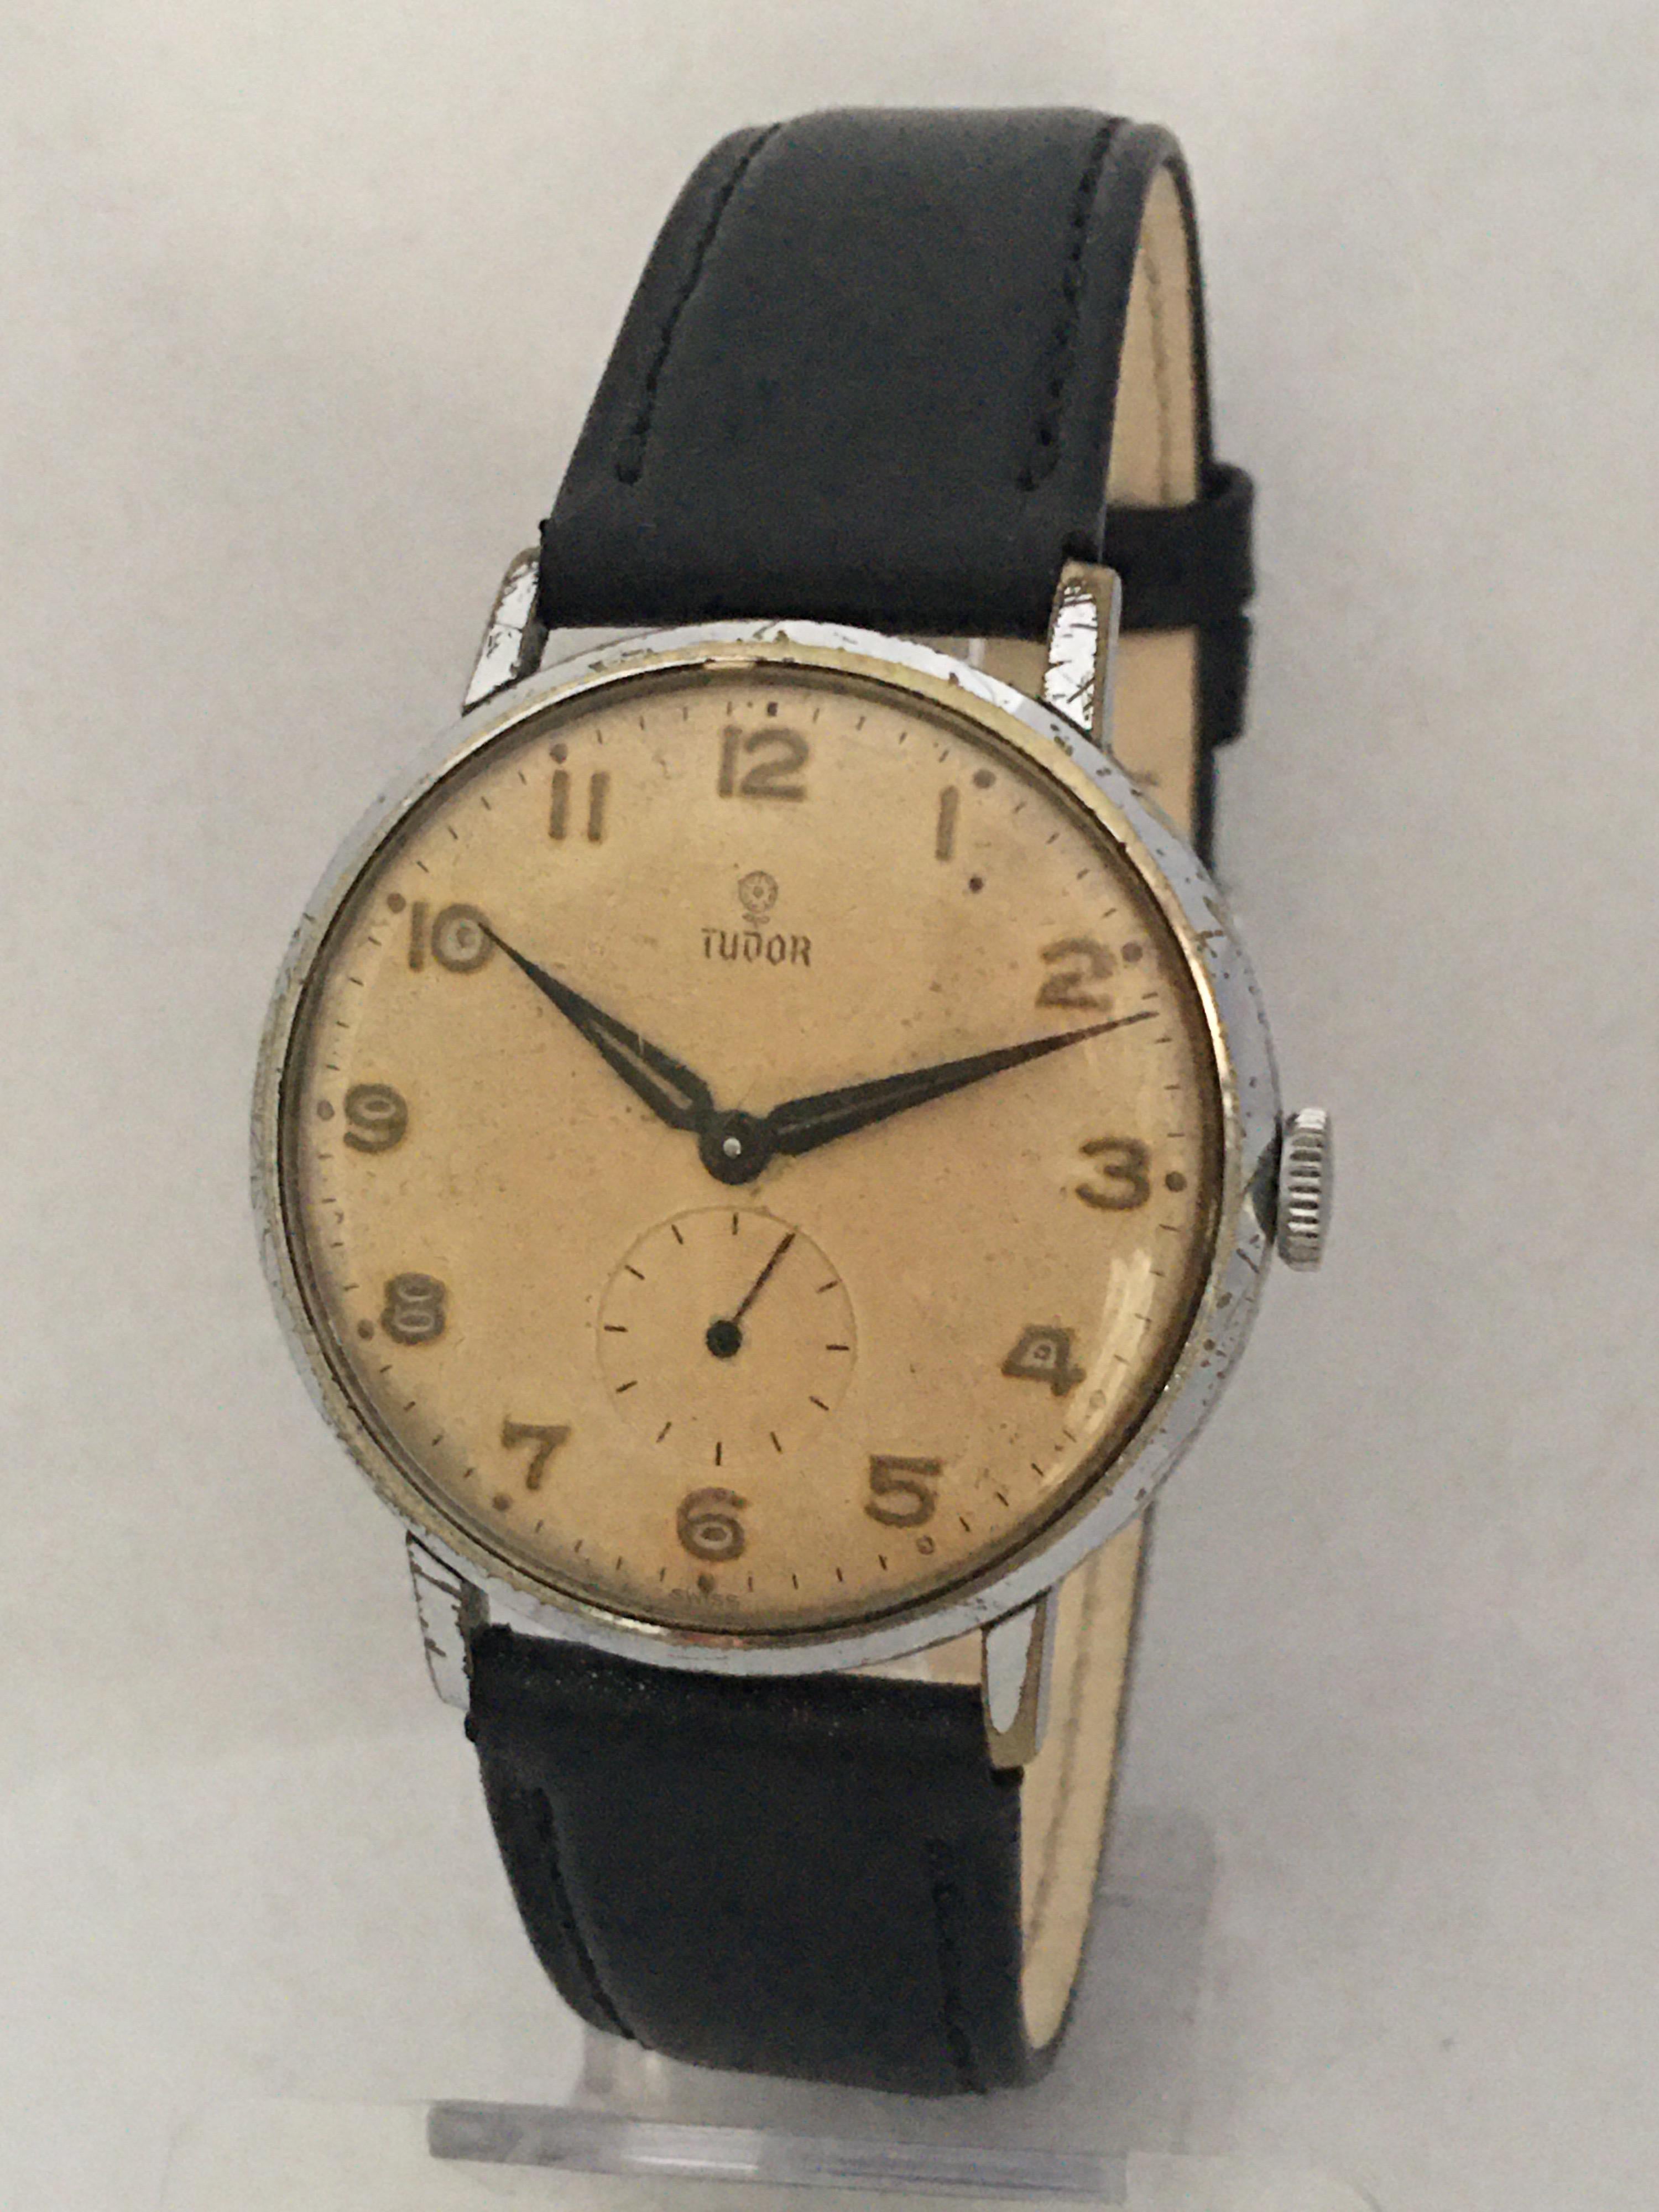 This beautiful pre-owned 35mm diameter (excluding crown) vintage hand winding silver plated watch is in good working condition. It is recently been serviced and it runs well. Visible signs of ageing and wear with light marks on the on the glass